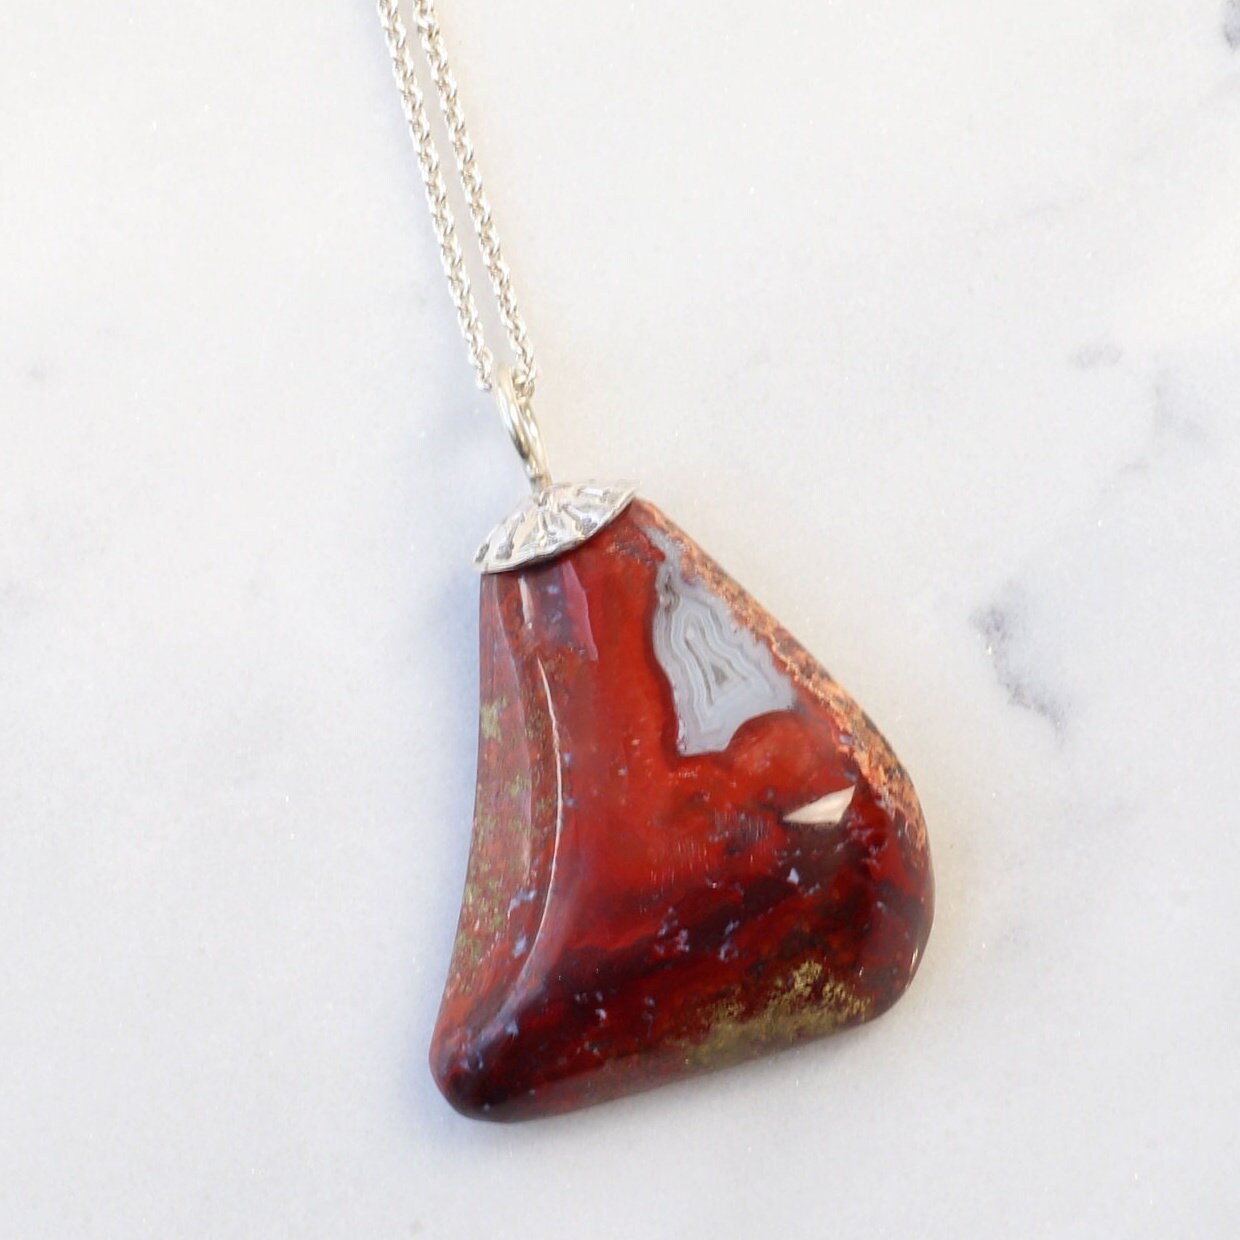 Chic Red Jasper Necklace Pendant in Sterling 935 Argentium Silver - Trendy Rock Collector Gift